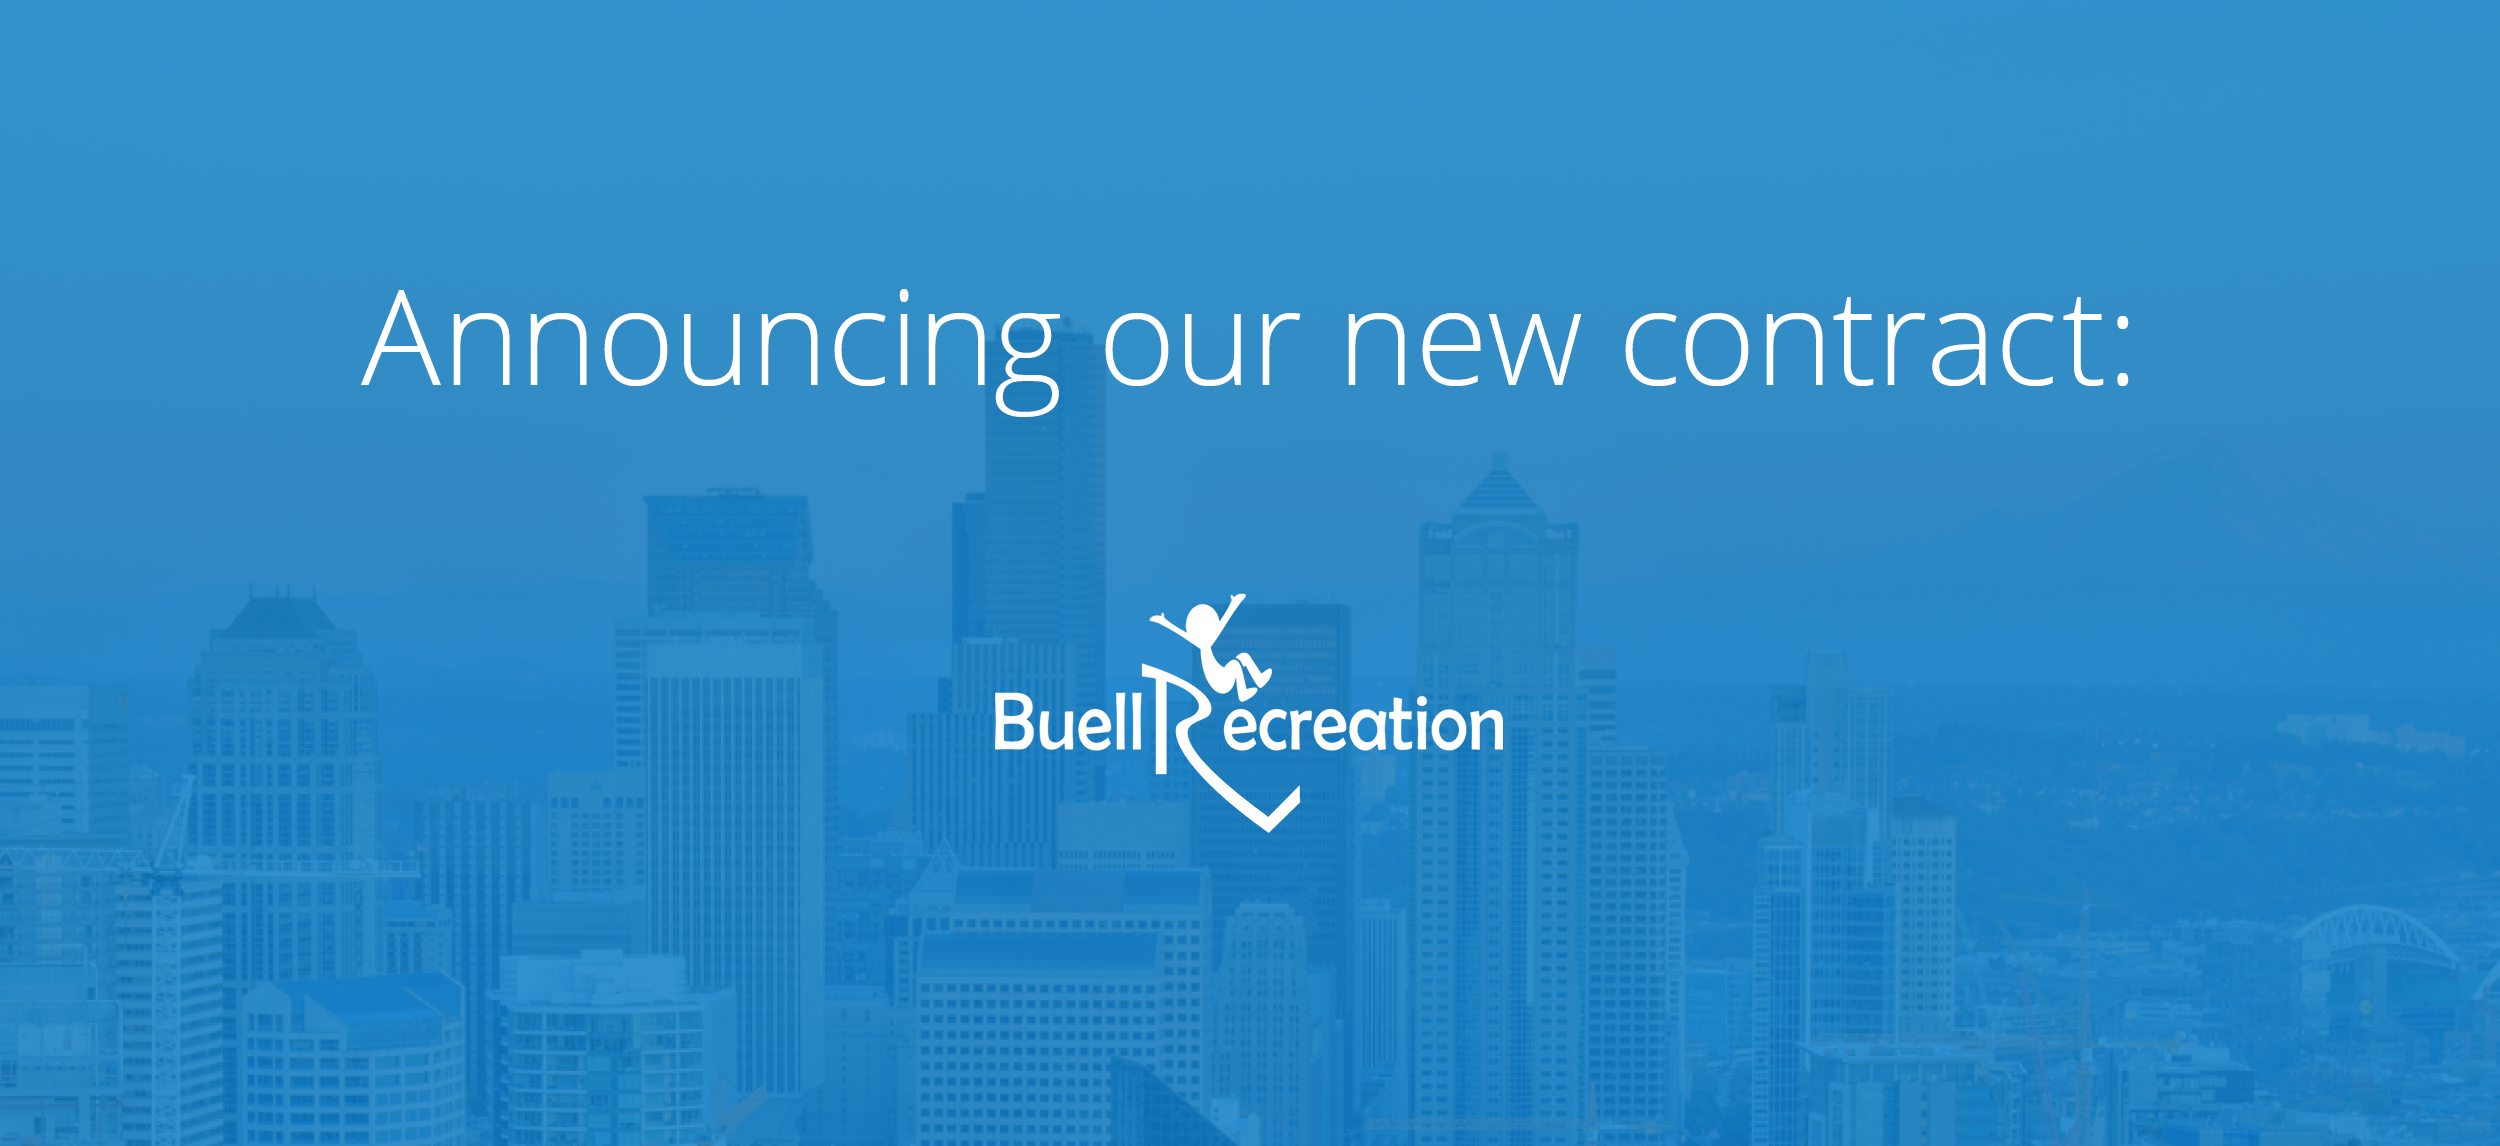 Announcing Buell Recreation, LLC: Our Newest Contract